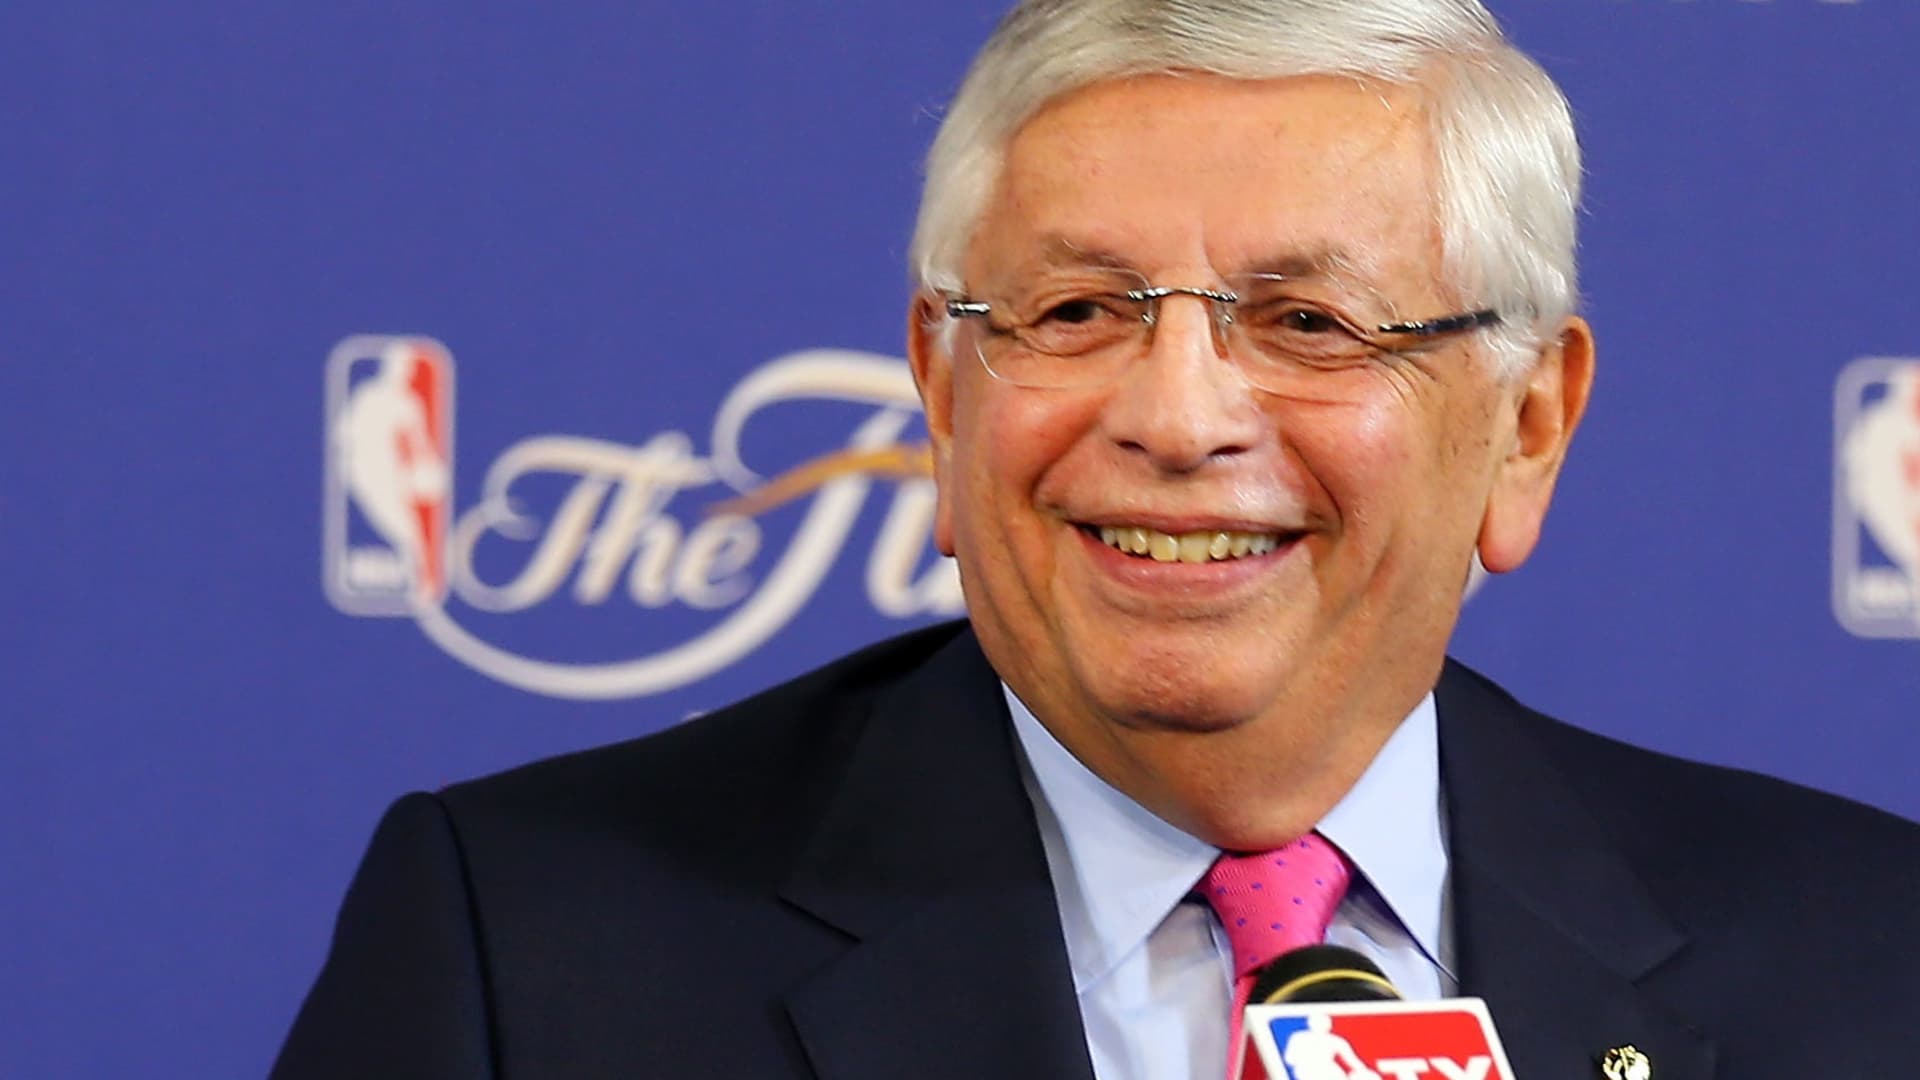 Then-NBA Commissioner David Stern addresses the media before Game One of the 2013 NBA Finals between the Miami Heat and the San Antonio Spurs at American Airlines Arena on June 6, 2013 in Miami.